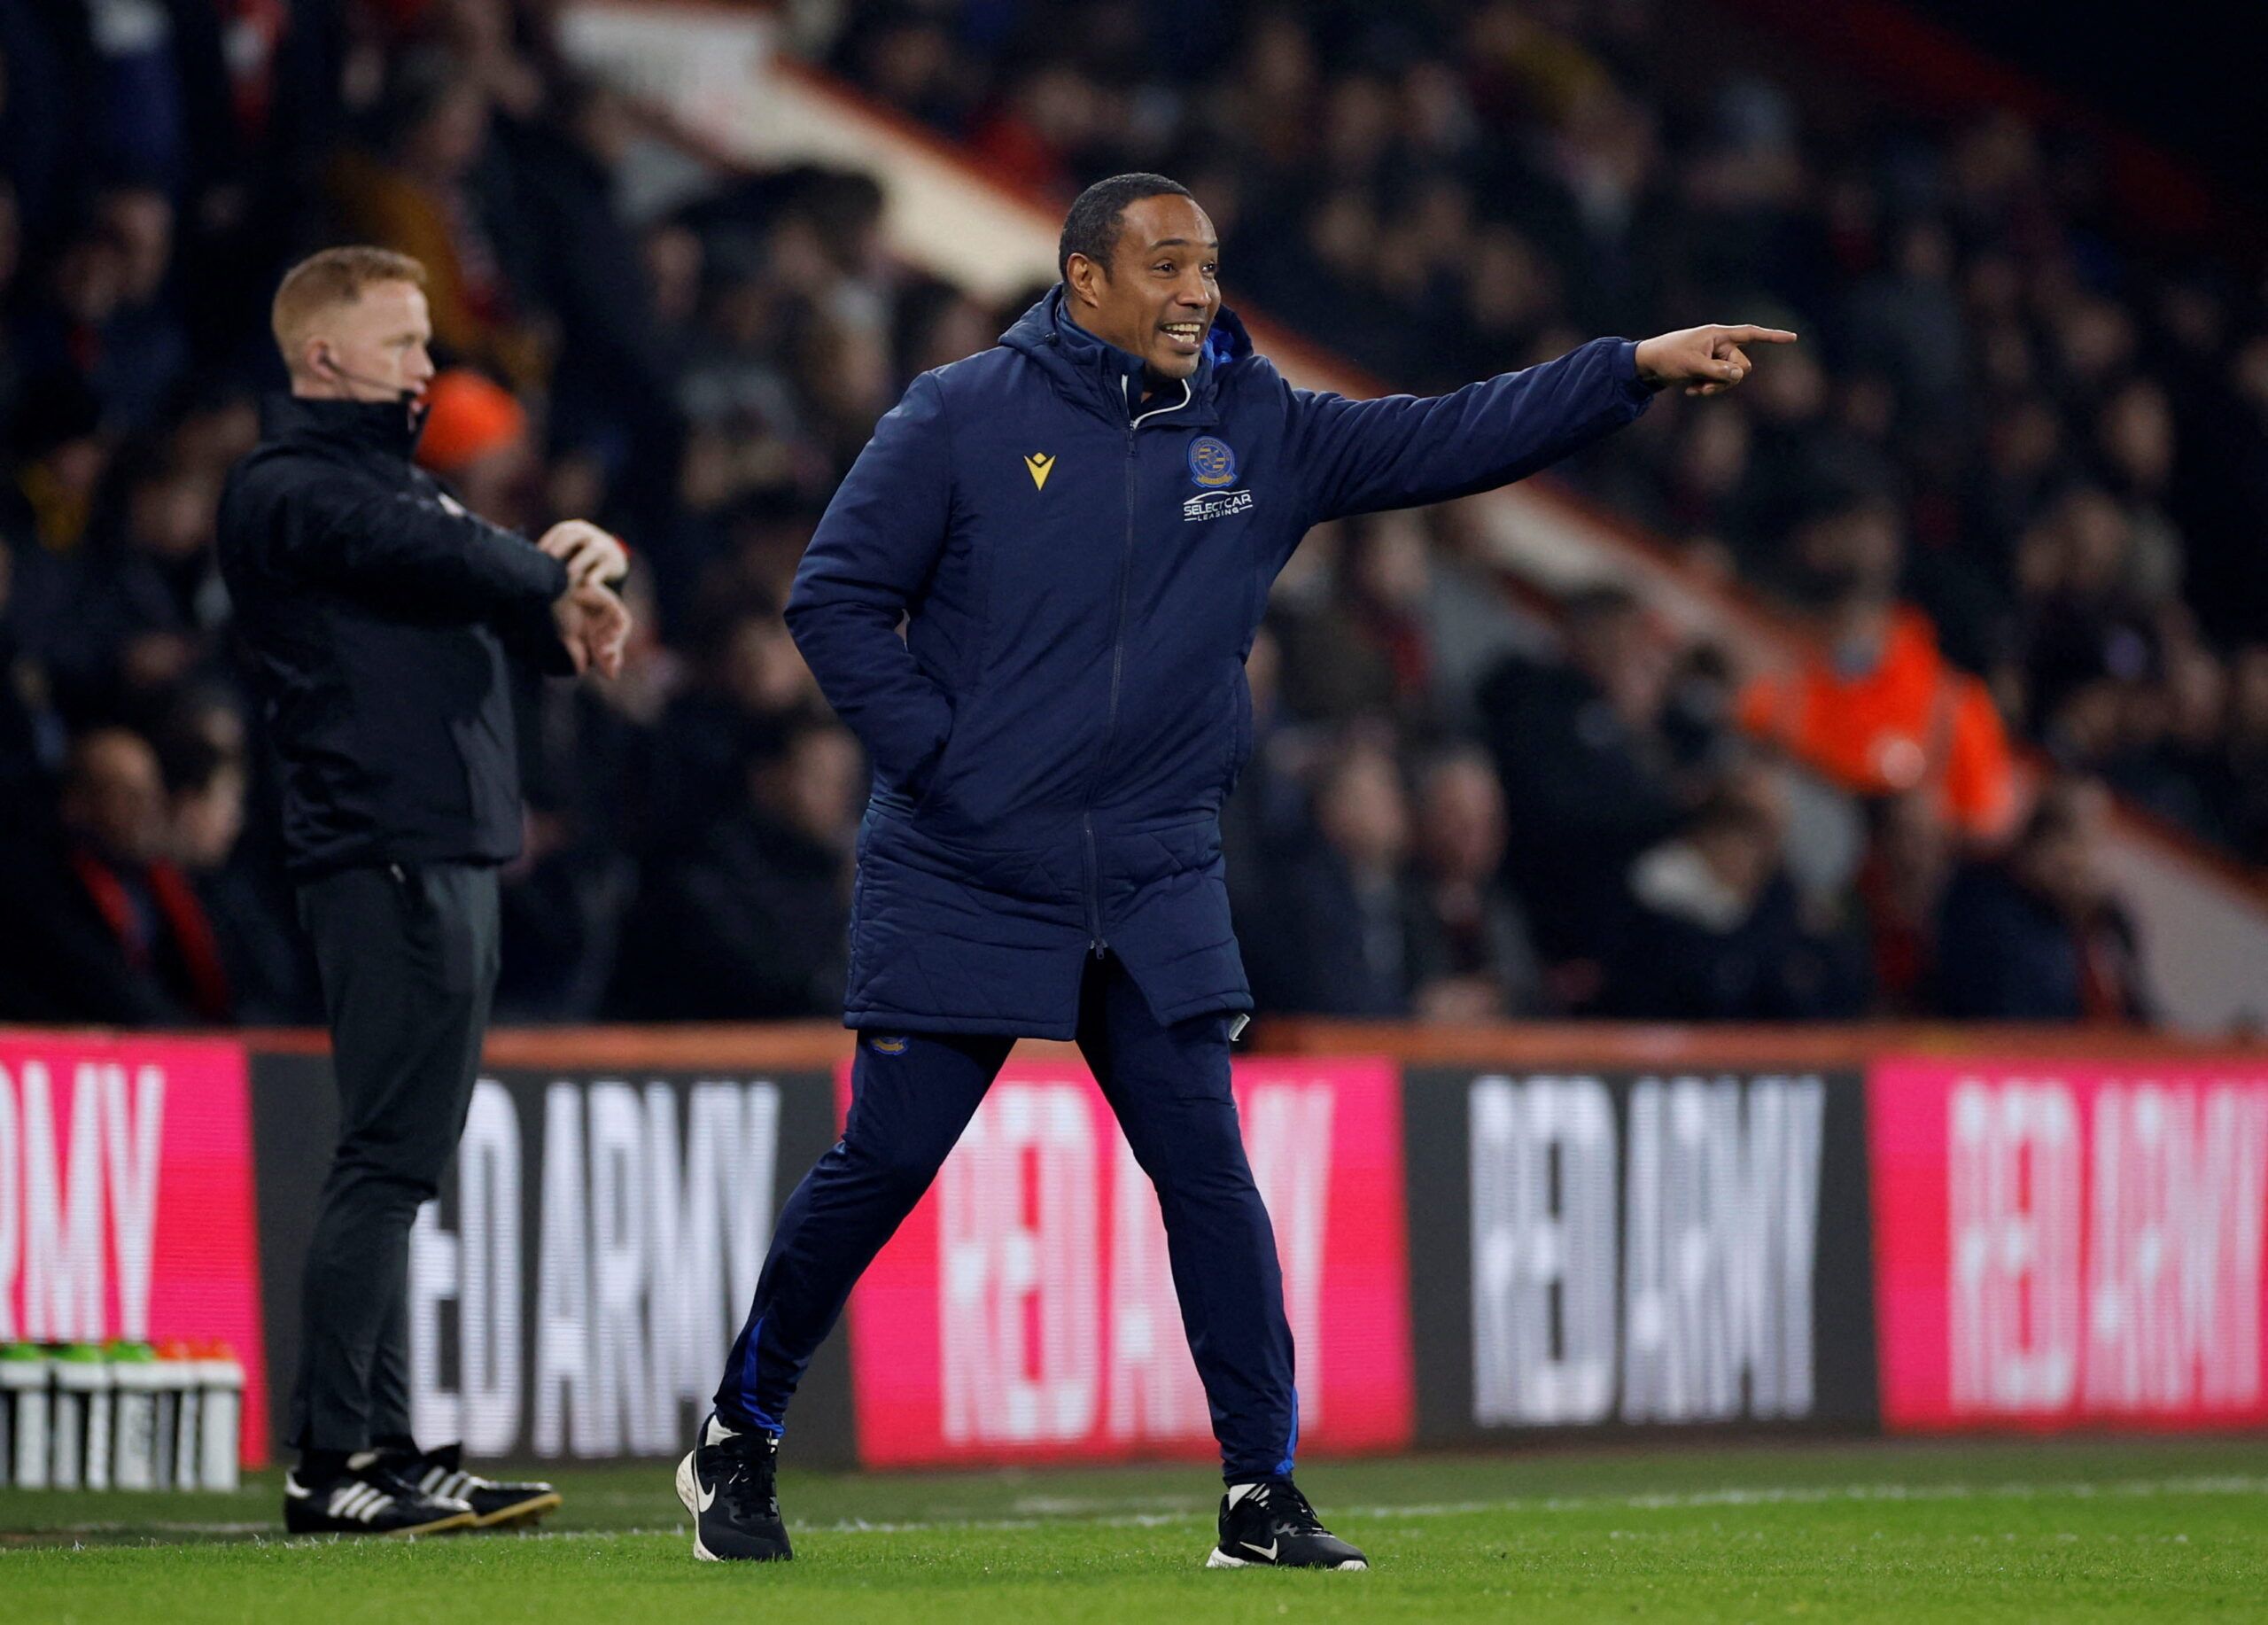 Soccer Football - Championship - AFC Bournemouth v Reading - Vitality Stadium, Bournemouth, Britain - March 15, 2022   Reading interim manager Paul Ince  Action Images/John Sibley  EDITORIAL USE ONLY. No use with unauthorized audio, video, data, fixture lists, club/league logos or 